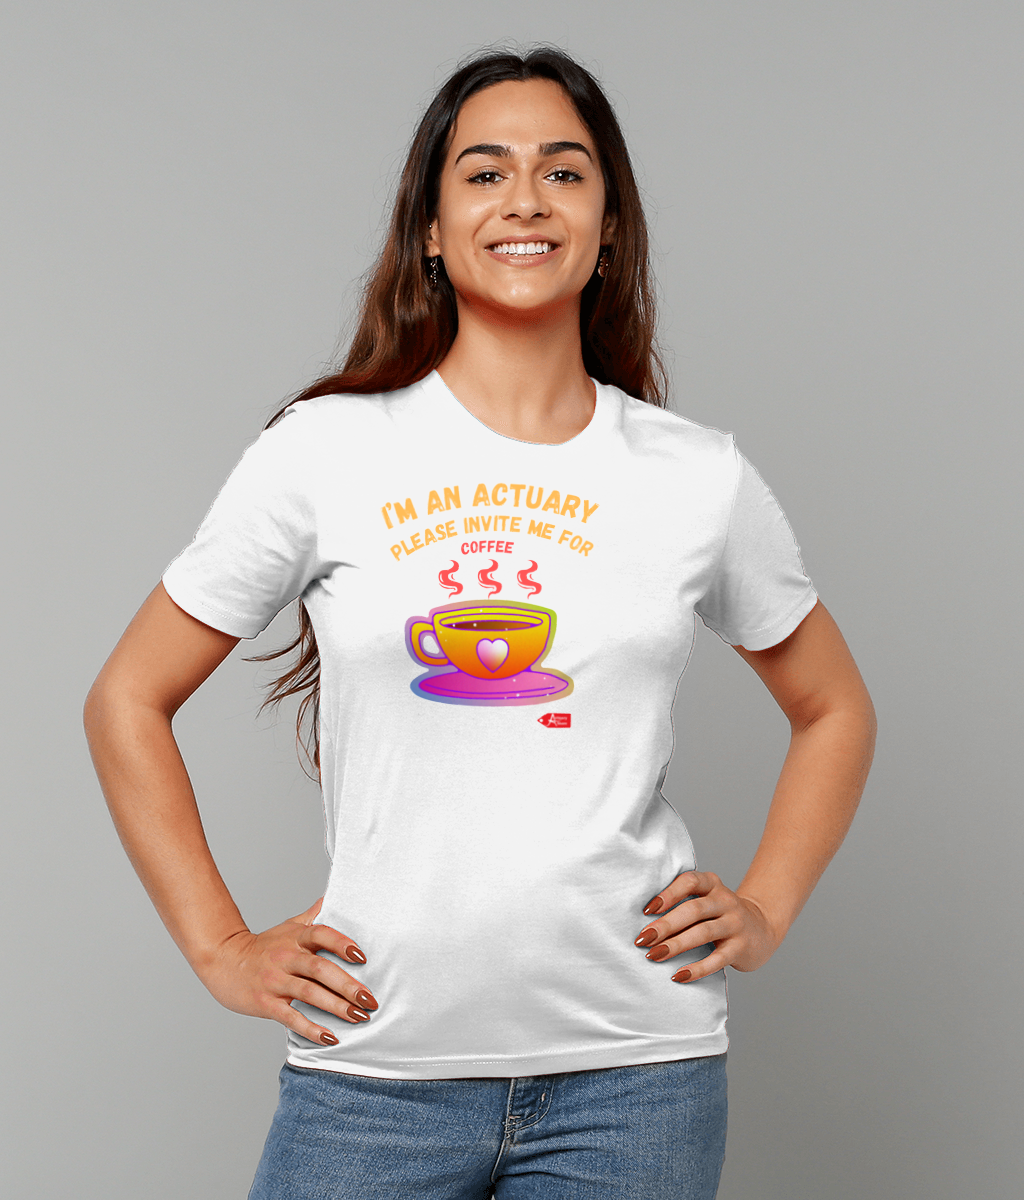 I'm An Actuary Please Invite Me for Coffee T-shirt (Black and White Variants)